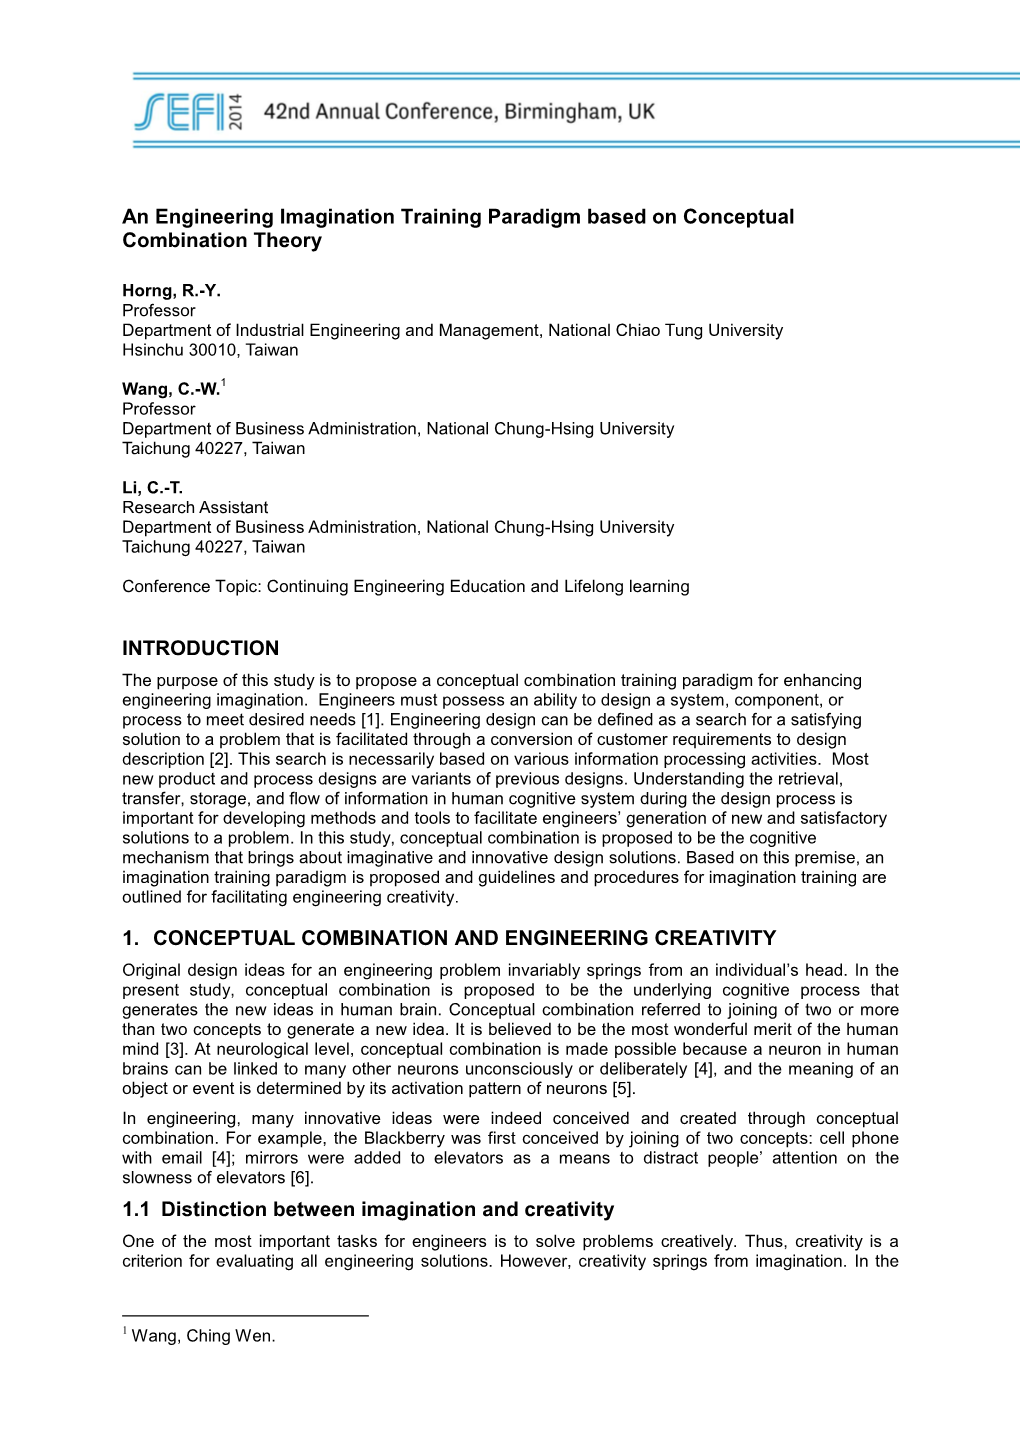 An Engineering Imagination Training Paradigm Based on Conceptual Combination Theory